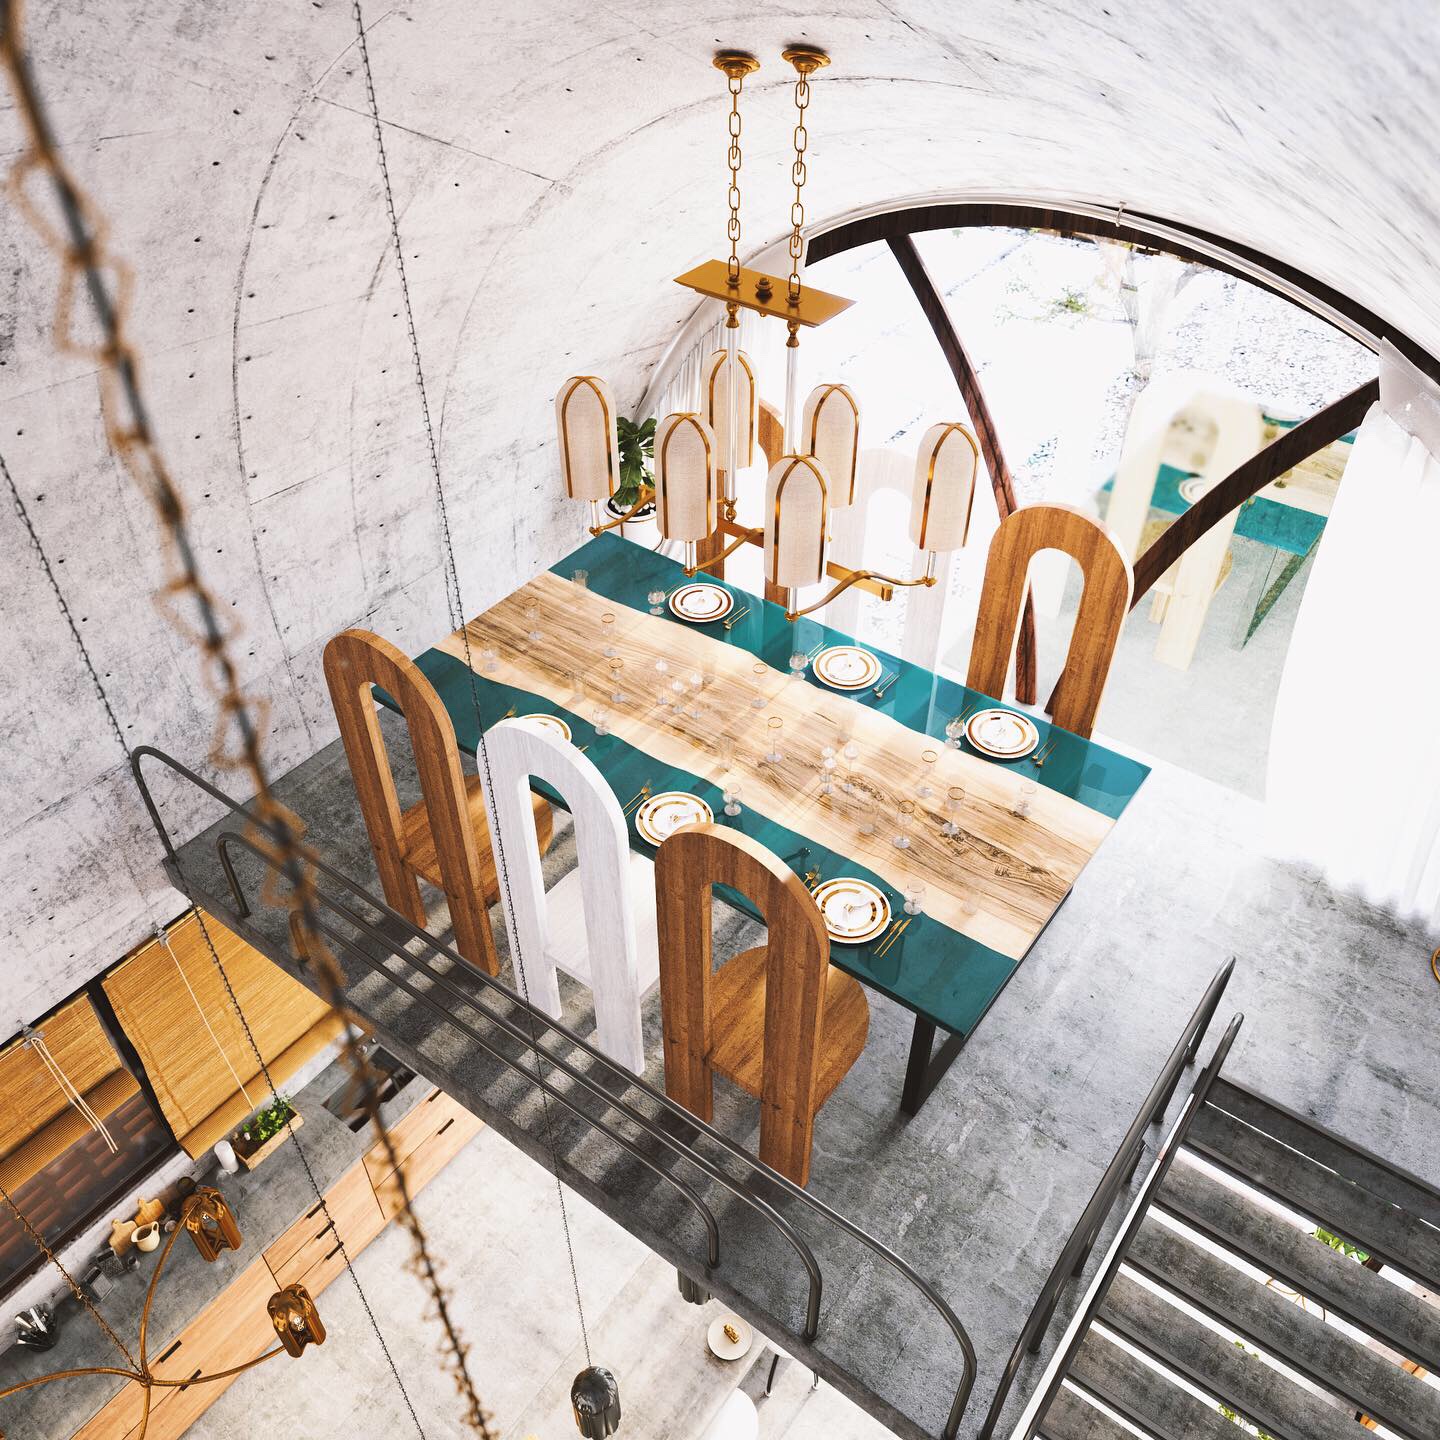 Middle East Modernism: 7 Projects Reimagining Traditional Islamic